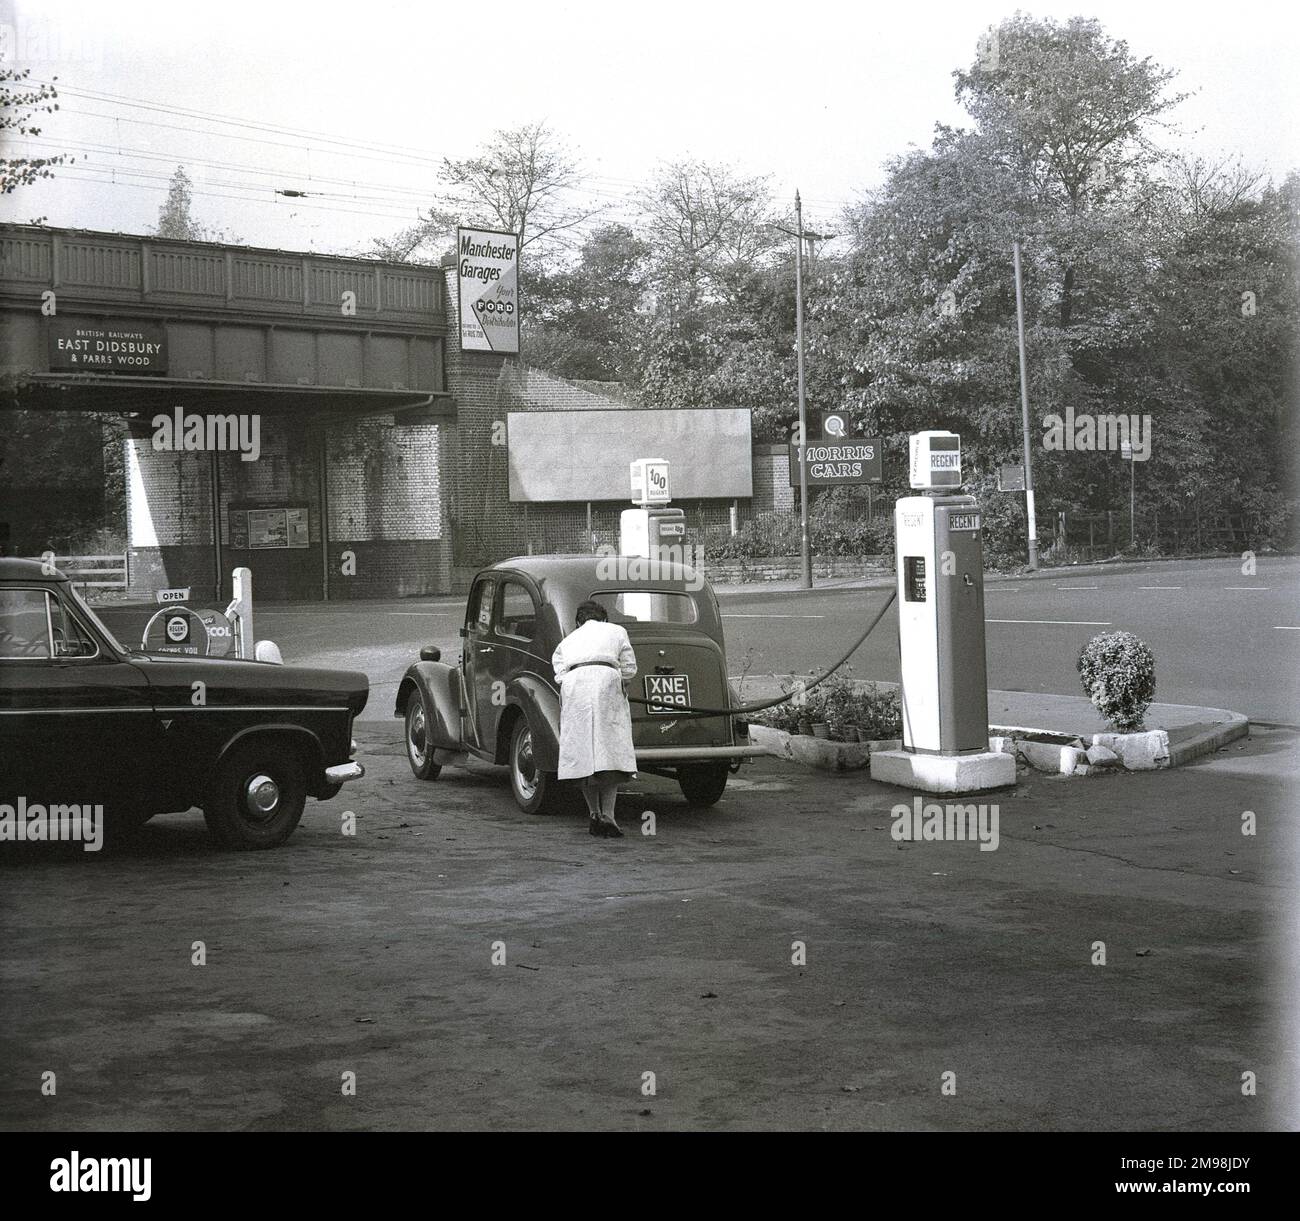 Late 1950s, historical, a female garge attendant putting petrol in a Ford Popular car at the Hargood Motor Co on the Wilmslow Rd, Parrs Wood, Manchester, England, UK. The fuel is Regent, a brand of The Regent Oil Company, set up in the UK in 1947 by Texaco of America and Trindad Leaseholds. Behind the garage, a railway bridge, sign for station, saying 'British Railways', East Didbsbury & Parrs Wood', Stock Photo